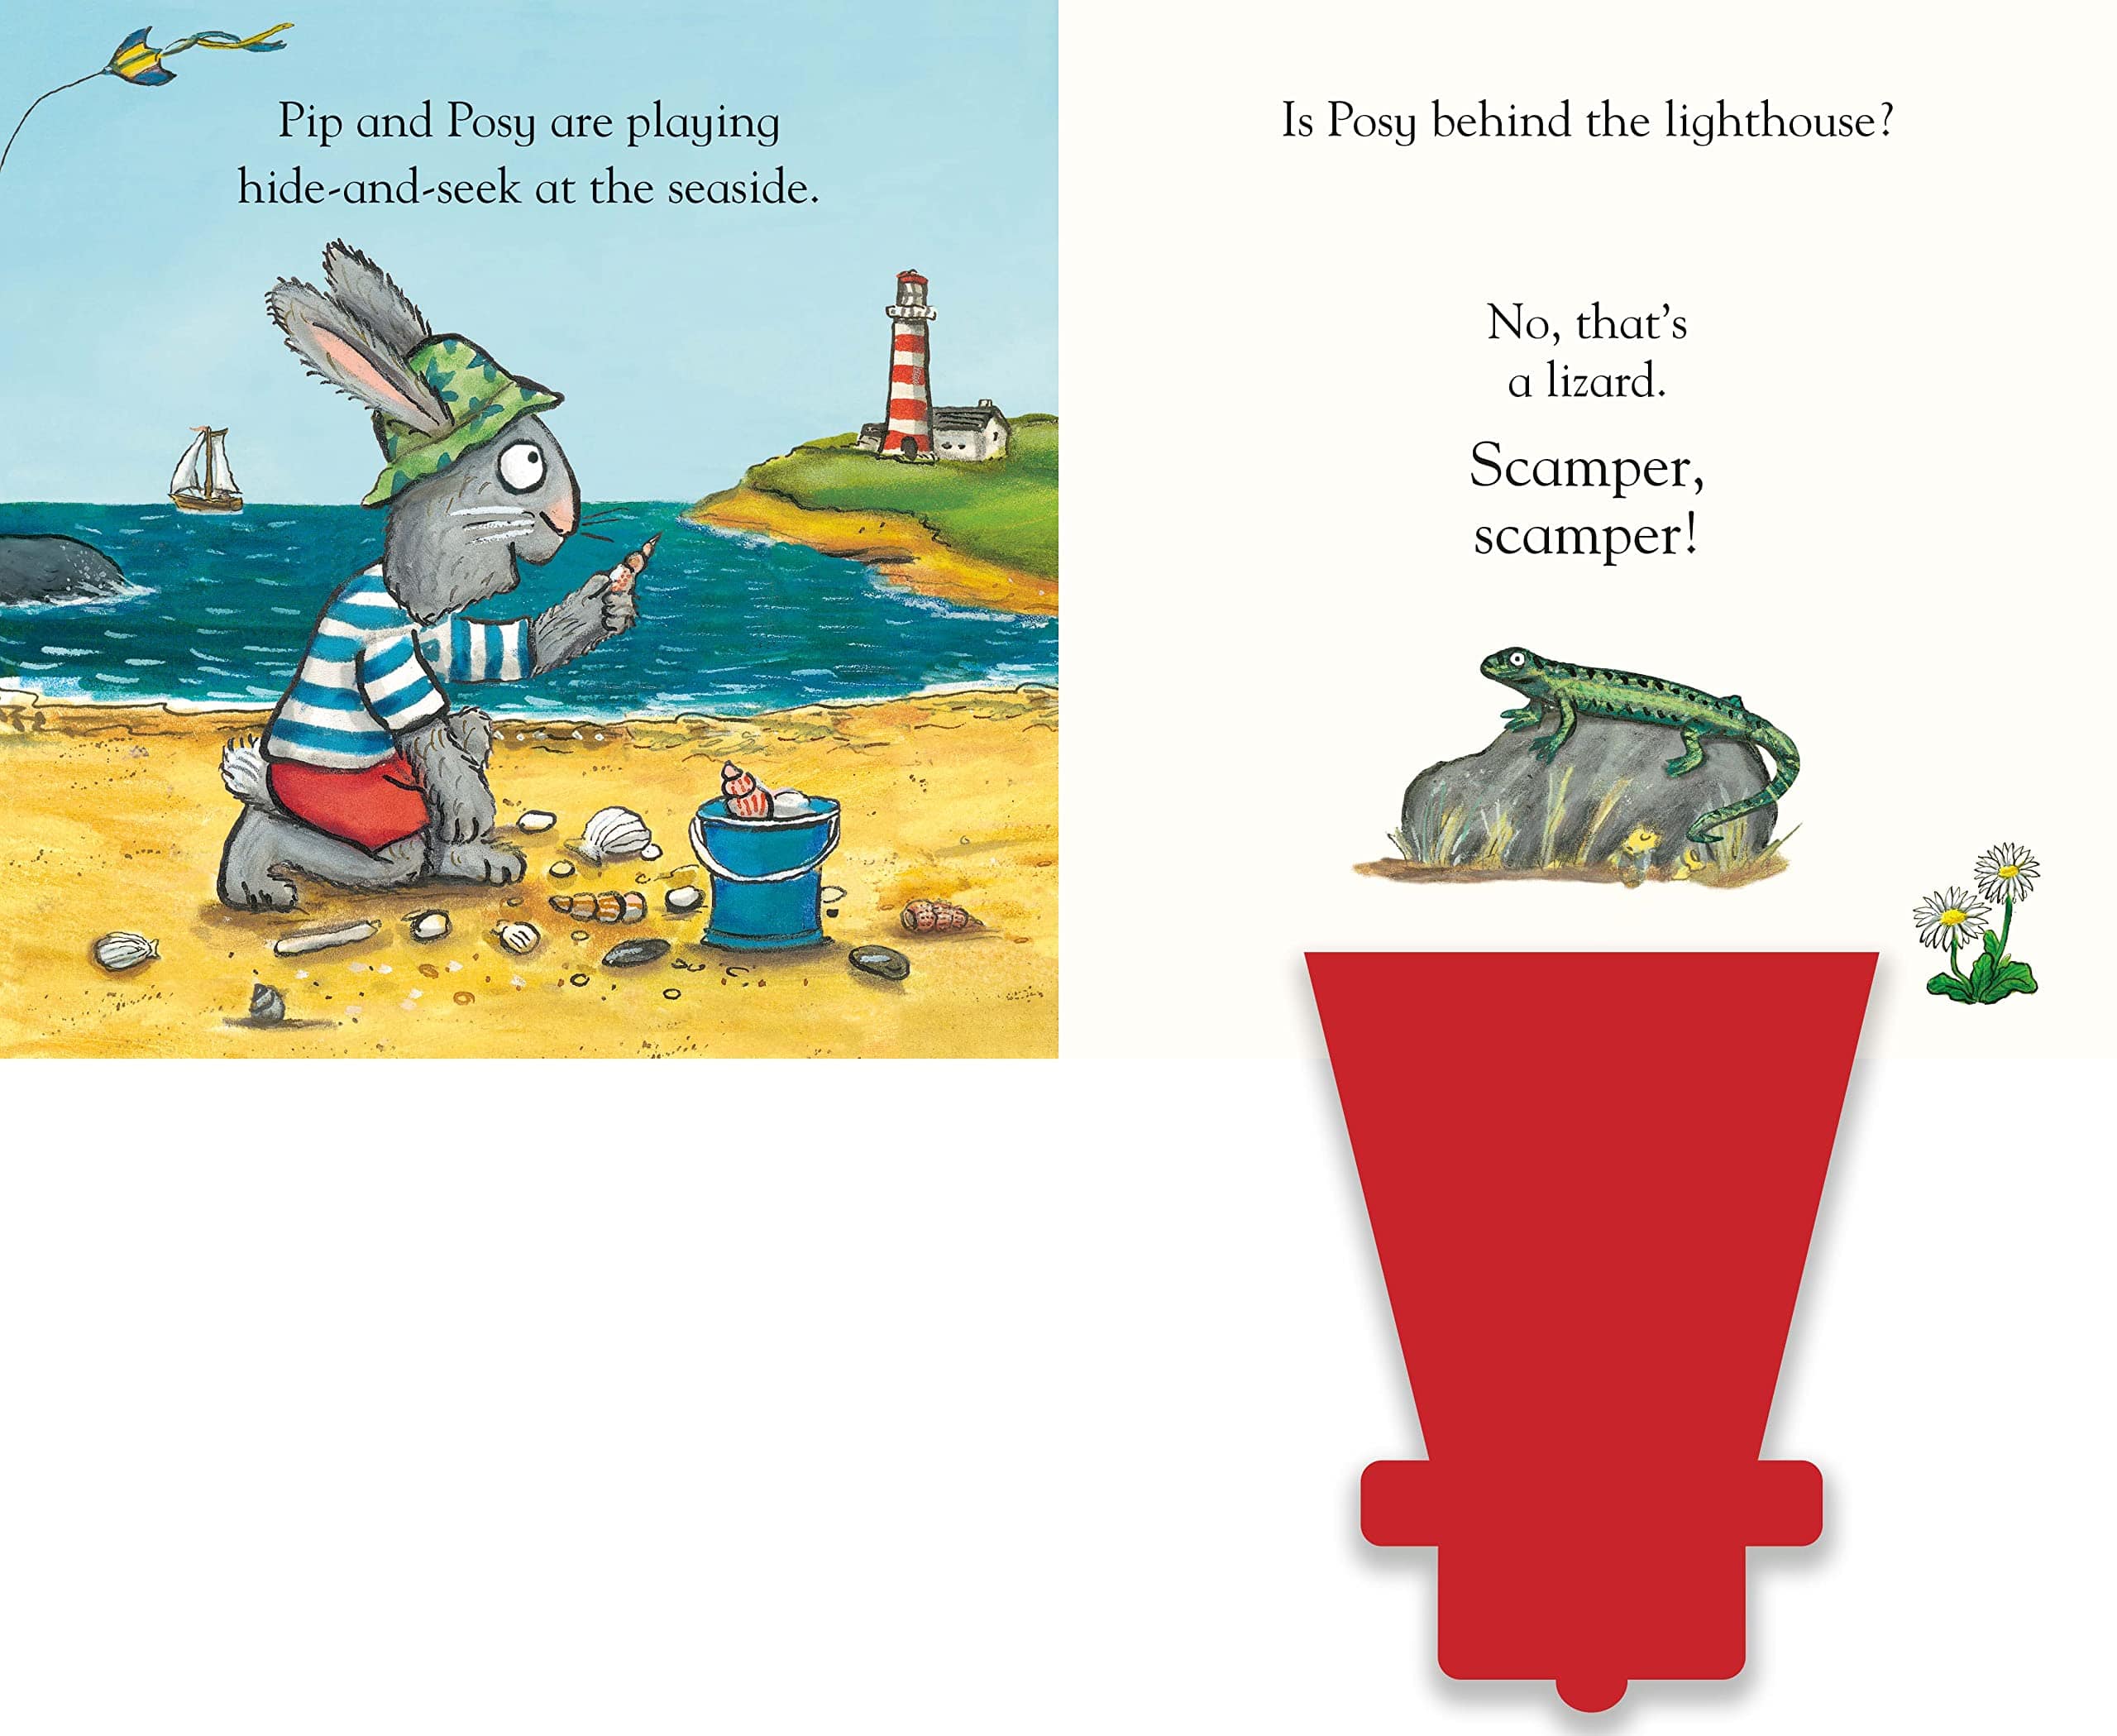 Pip and Posy, Where Are You? At the Seaside (A Felt Flaps Book)